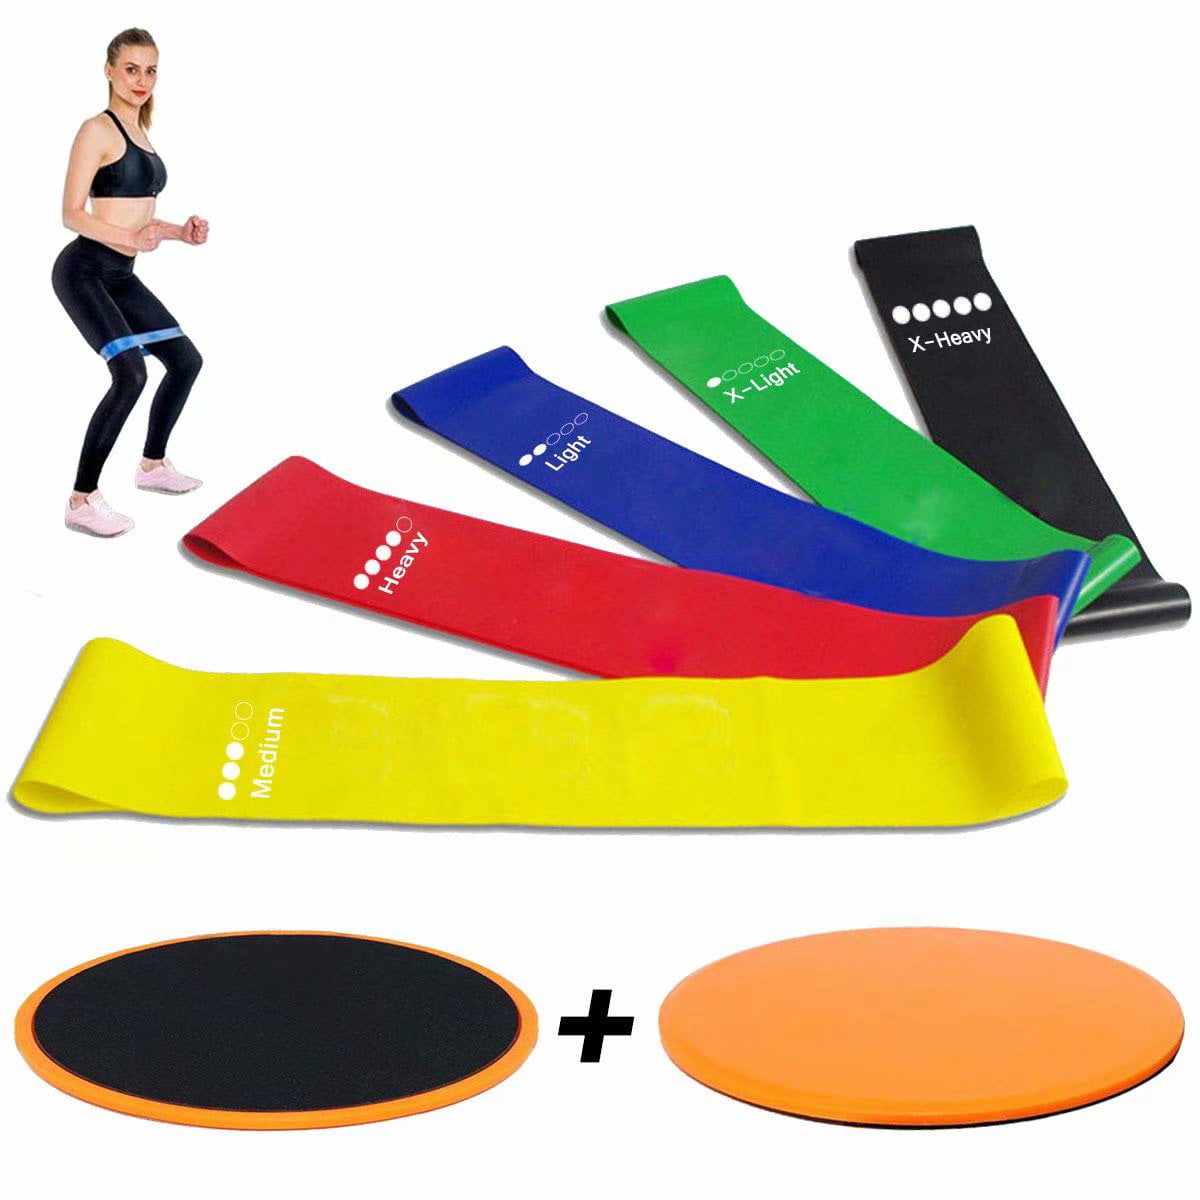 Resistance Band Loop Set Exercise Glutes Legs Yoga Pilates Home Gym Workout